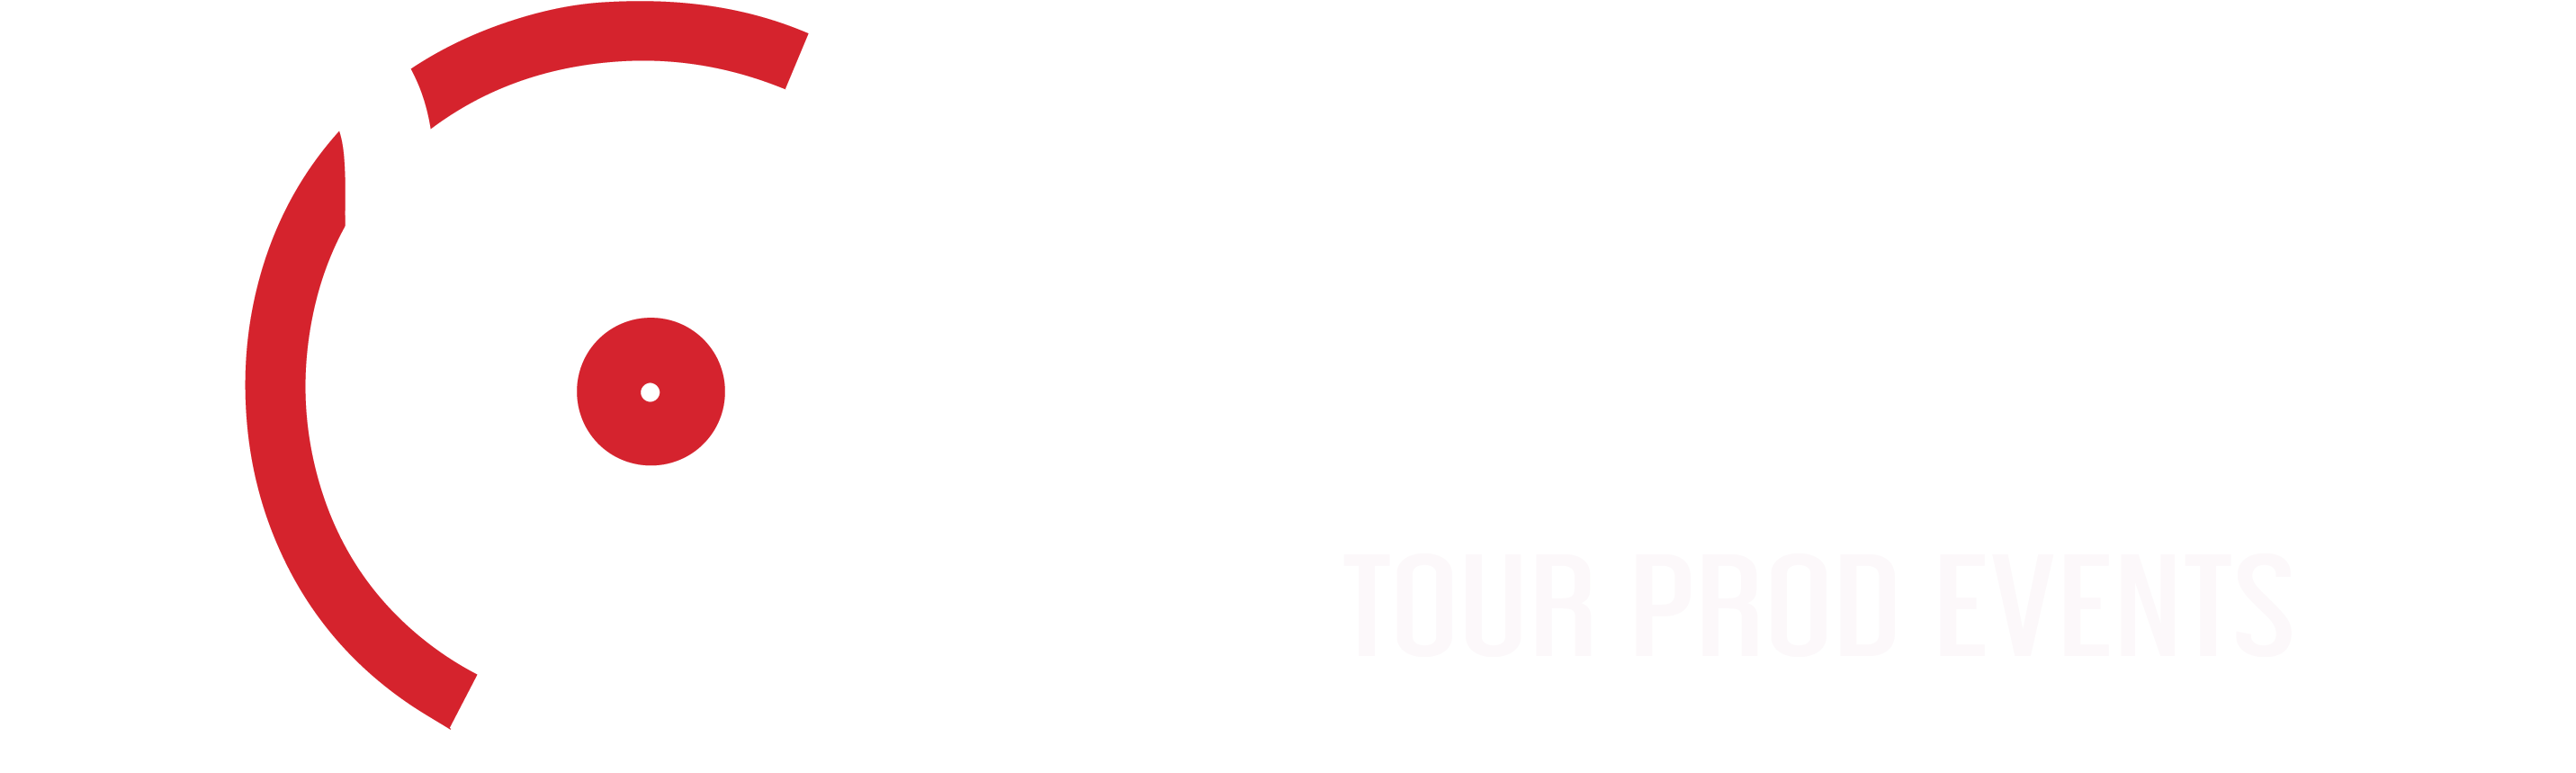 IDO Spectacles